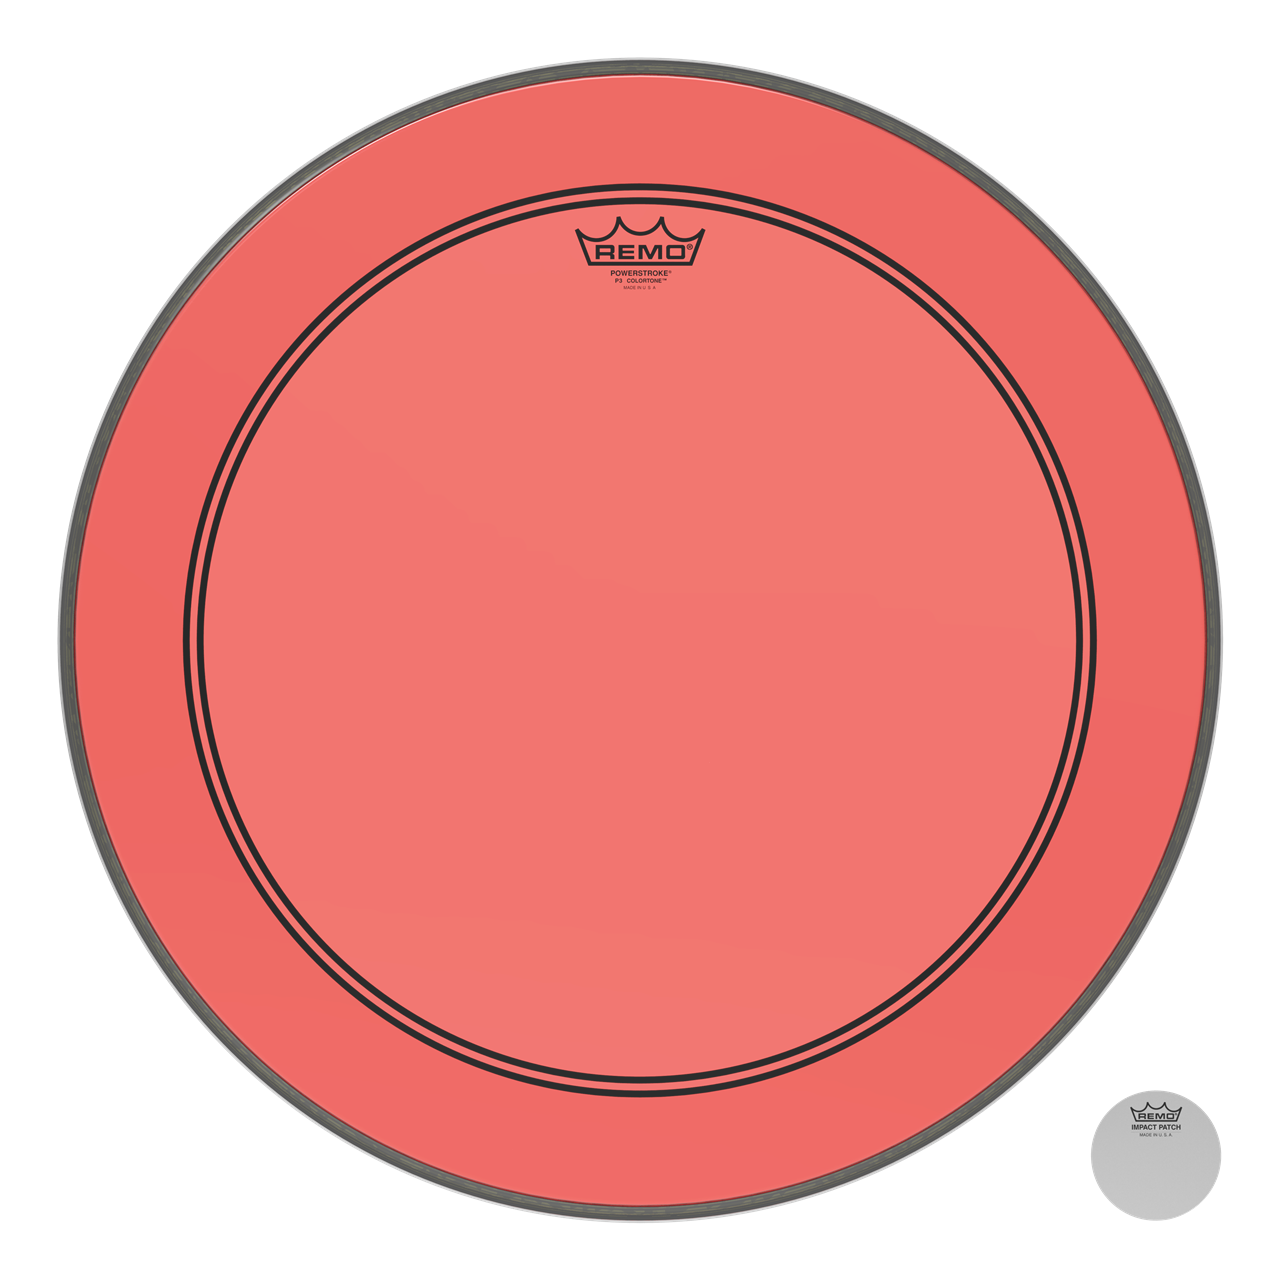 Remo P3-1318-CT-RD Powerstroke3 Colortone Red, 18" Bass Drum Fell